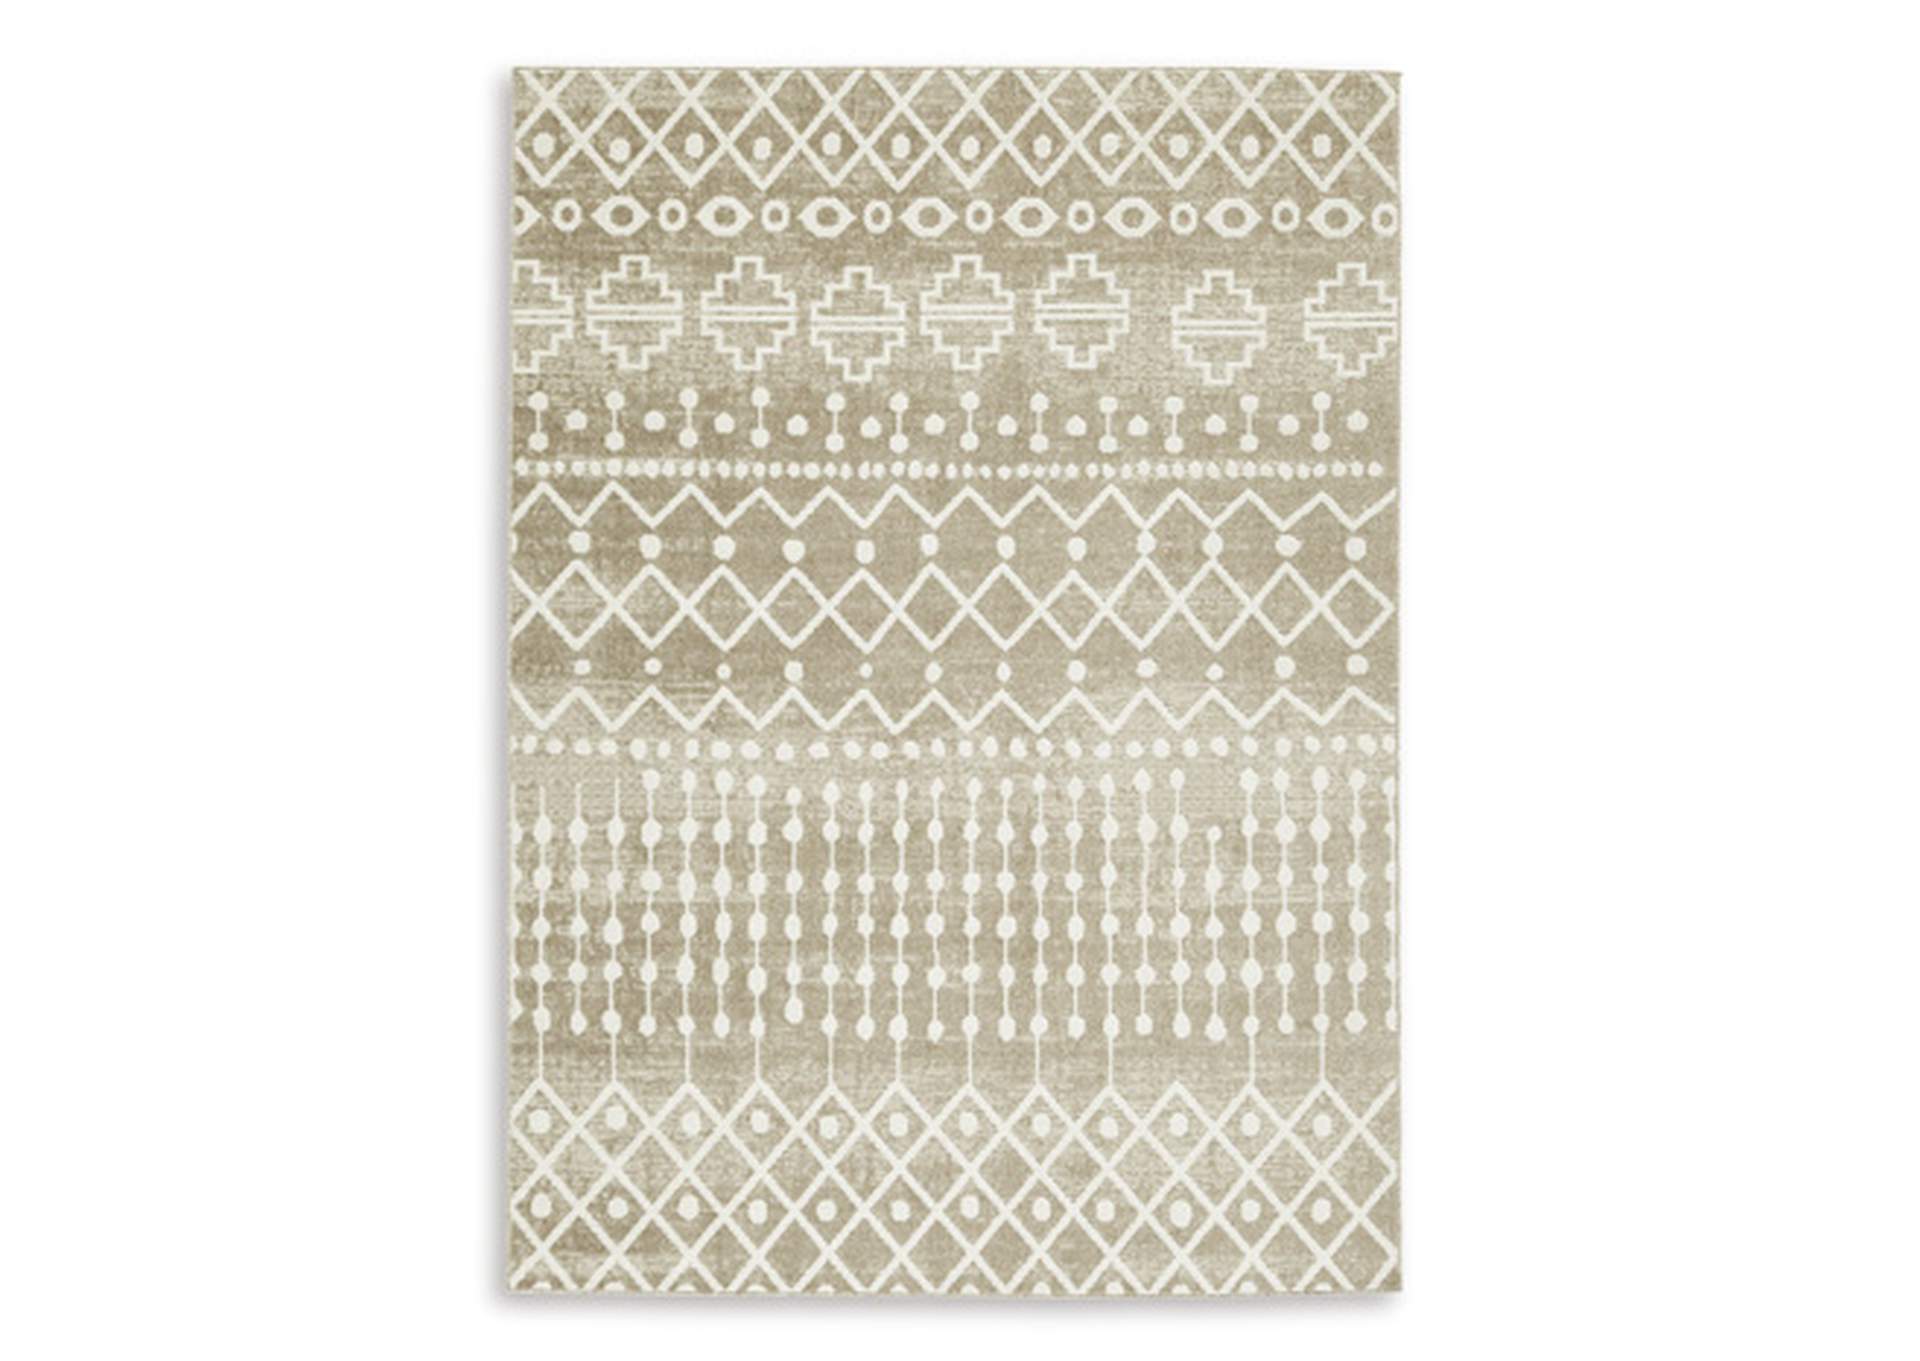 Bunchly 5' x 7' Rug,Signature Design By Ashley